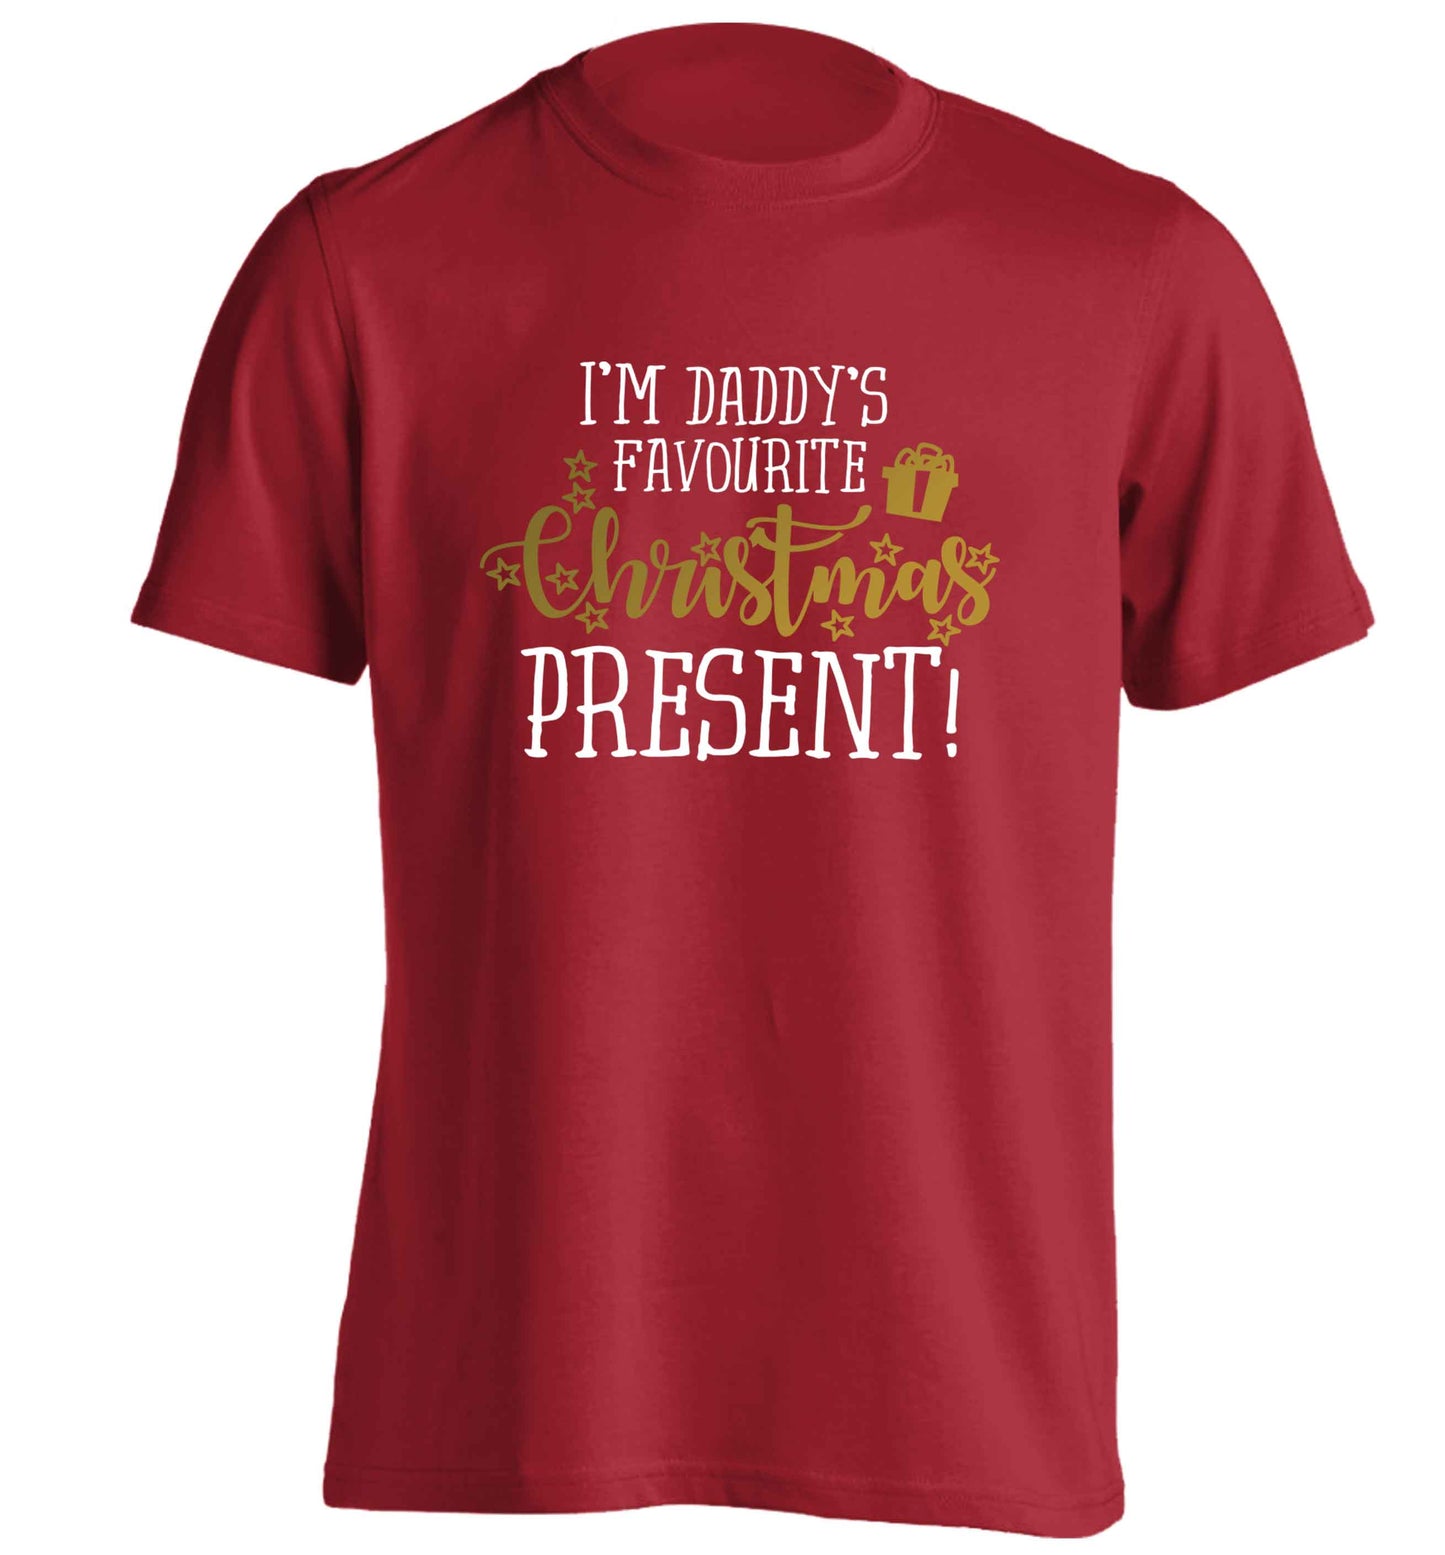 Daddy's favourite Christmas present adults unisex red Tshirt 2XL